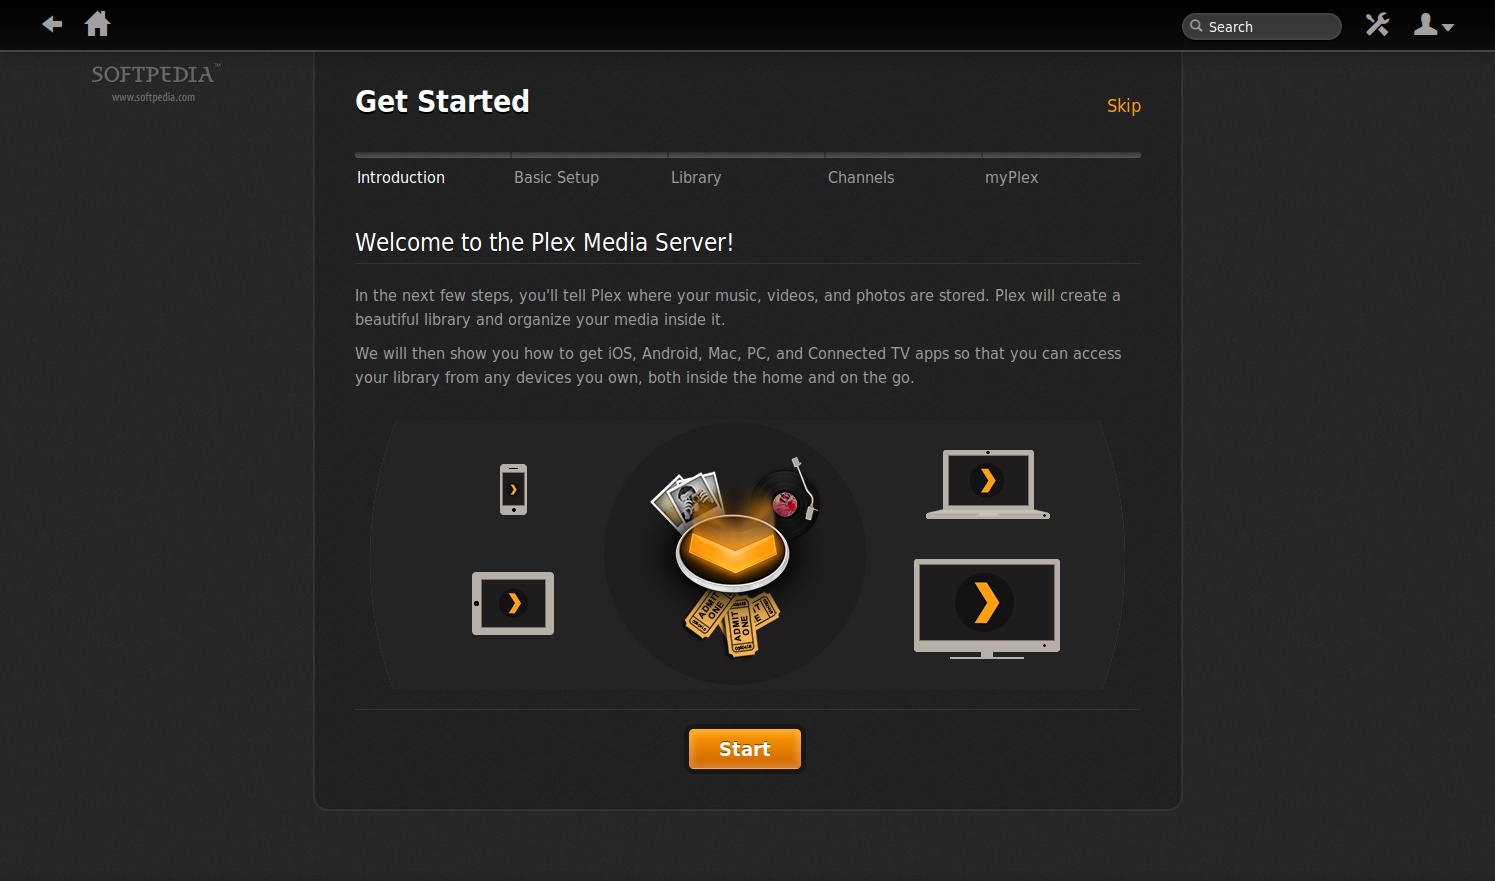 download the last version for android Plex Media Server 1.32.5.7328